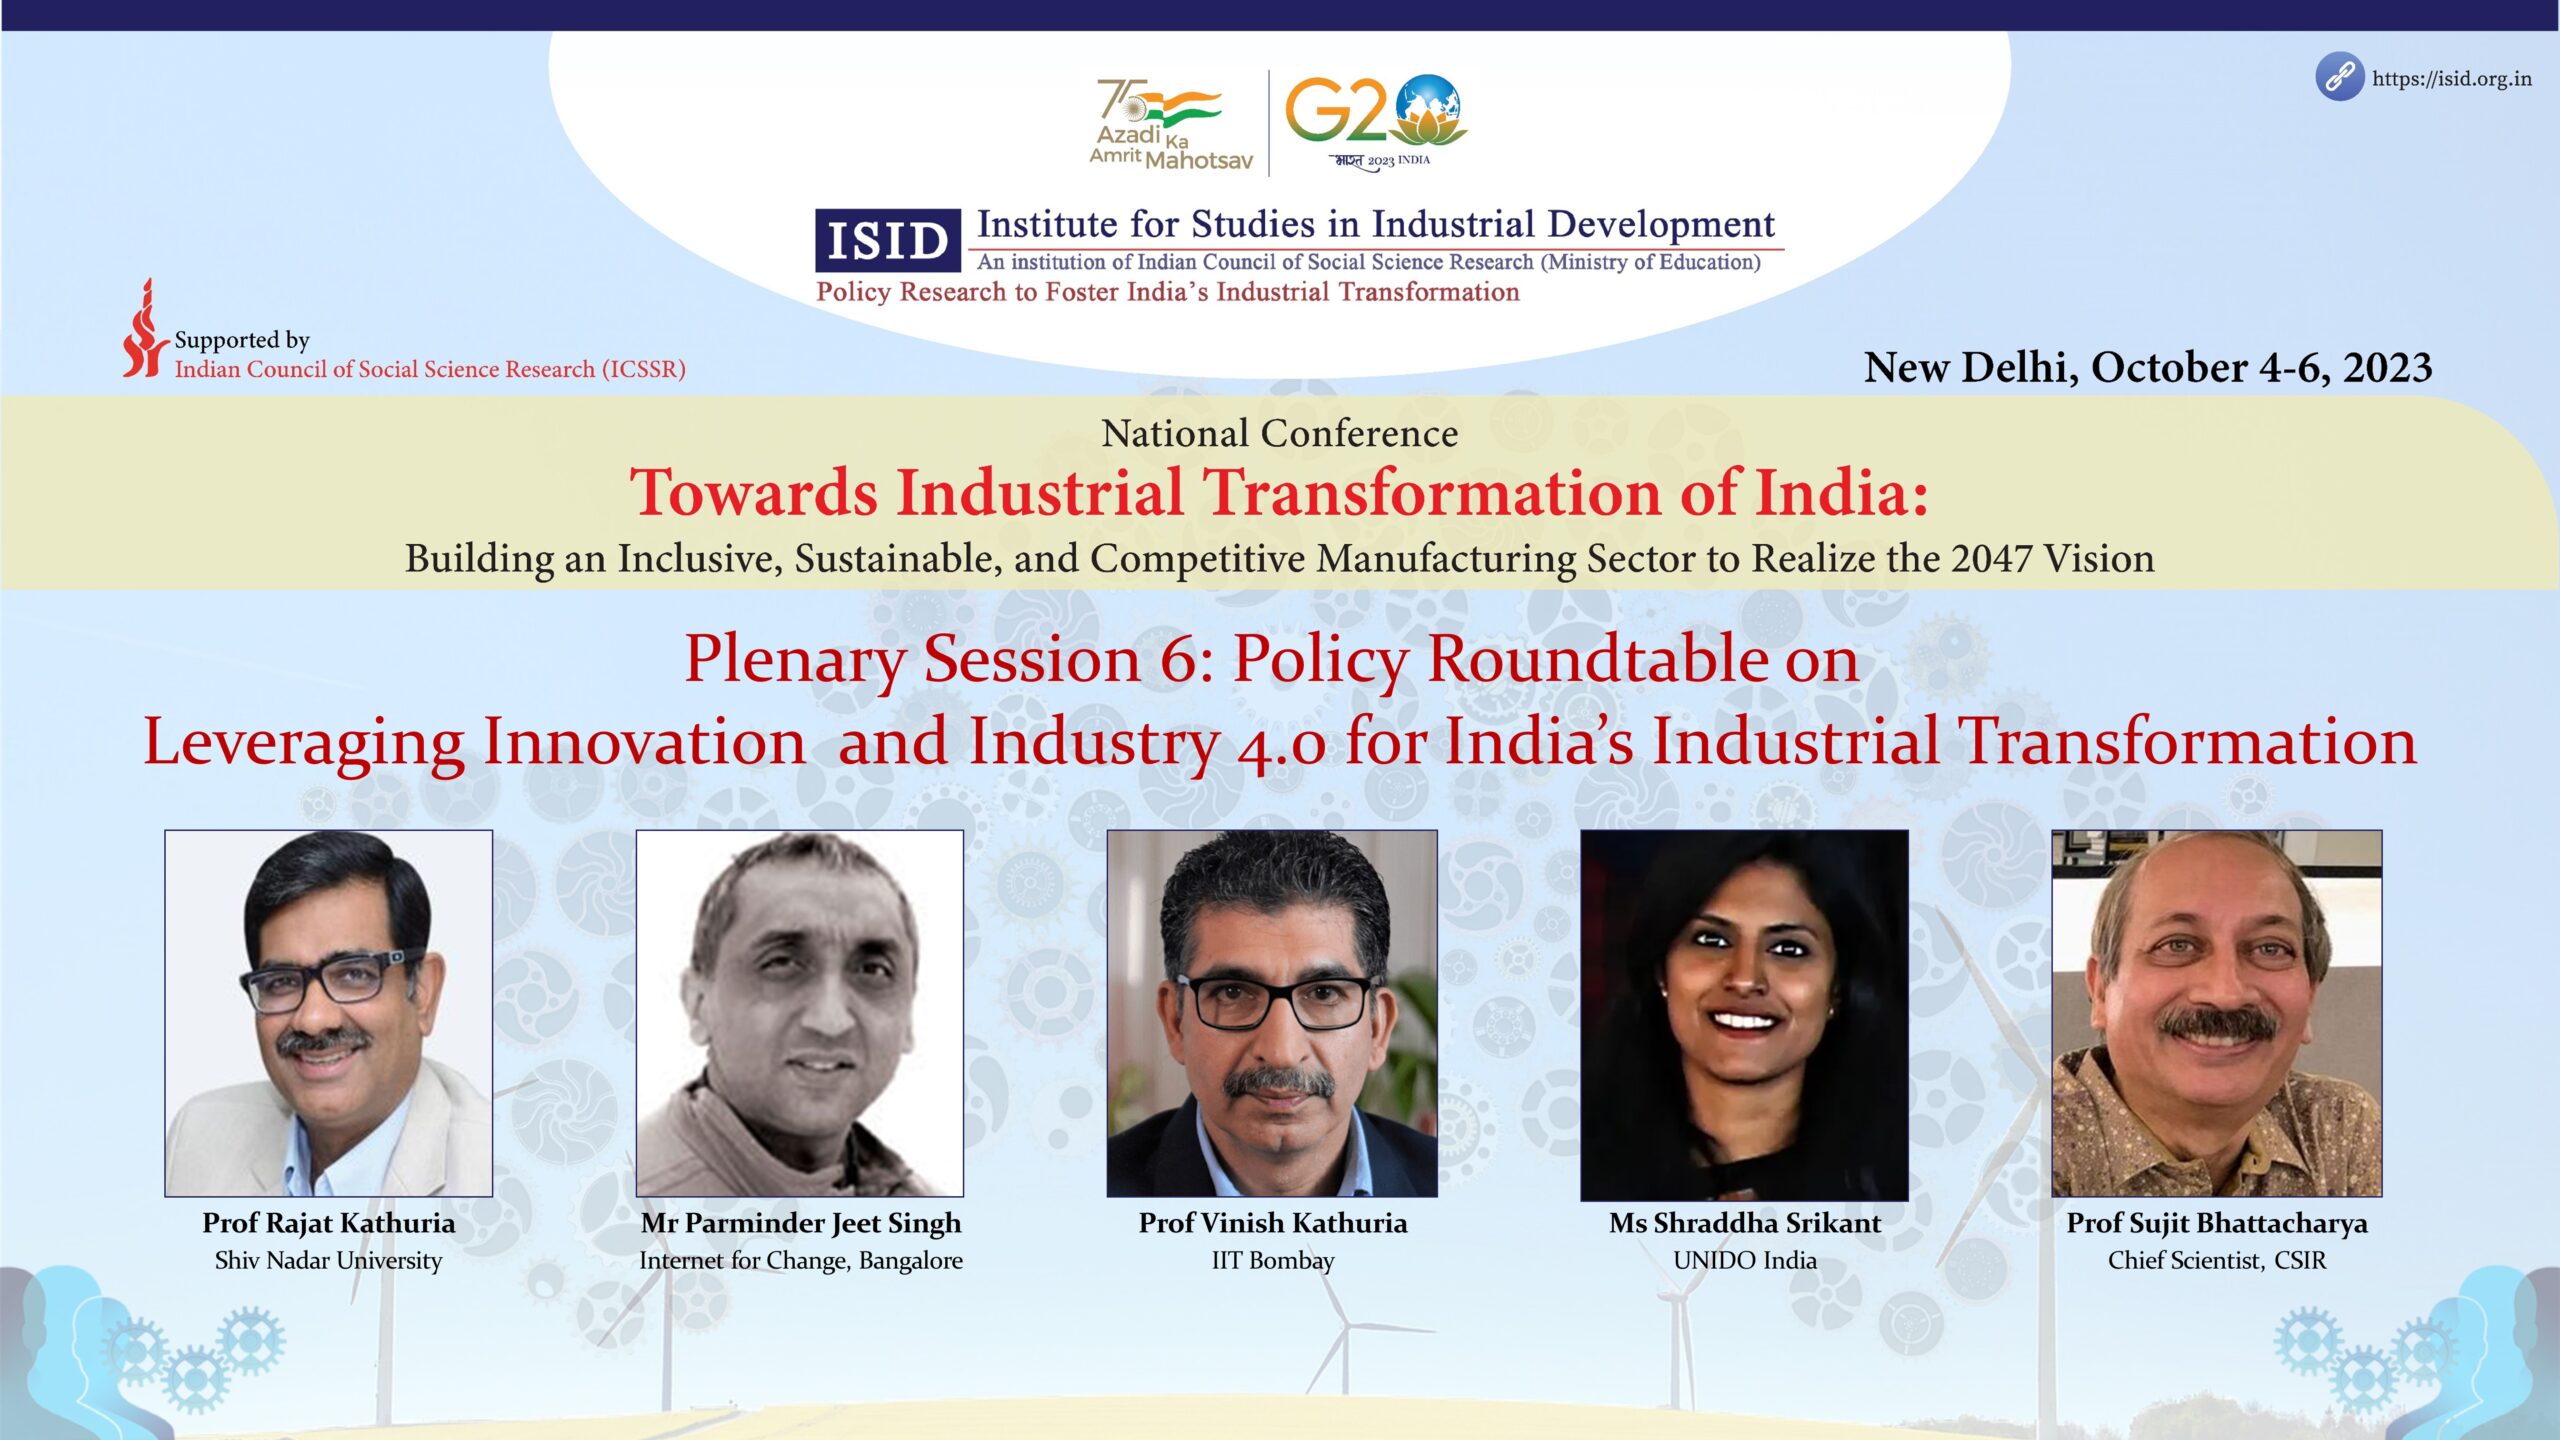 Policy Roundtable on Leveraging Innovation and Industry 4.0 for India’s Industrial Transformation